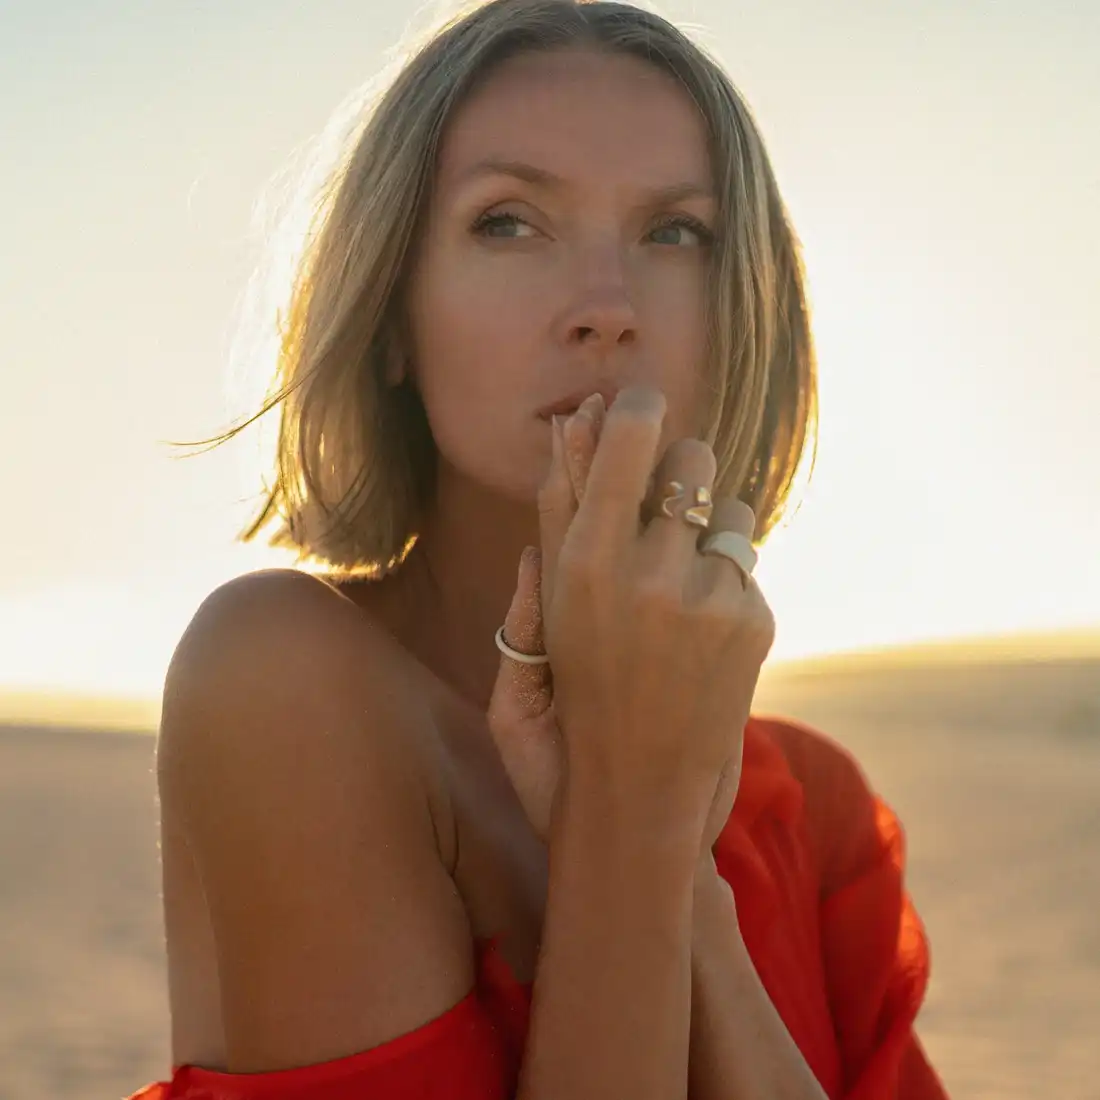 woman in red dress in desert with hand by her mouth looking to the side | BOTOX® in miami